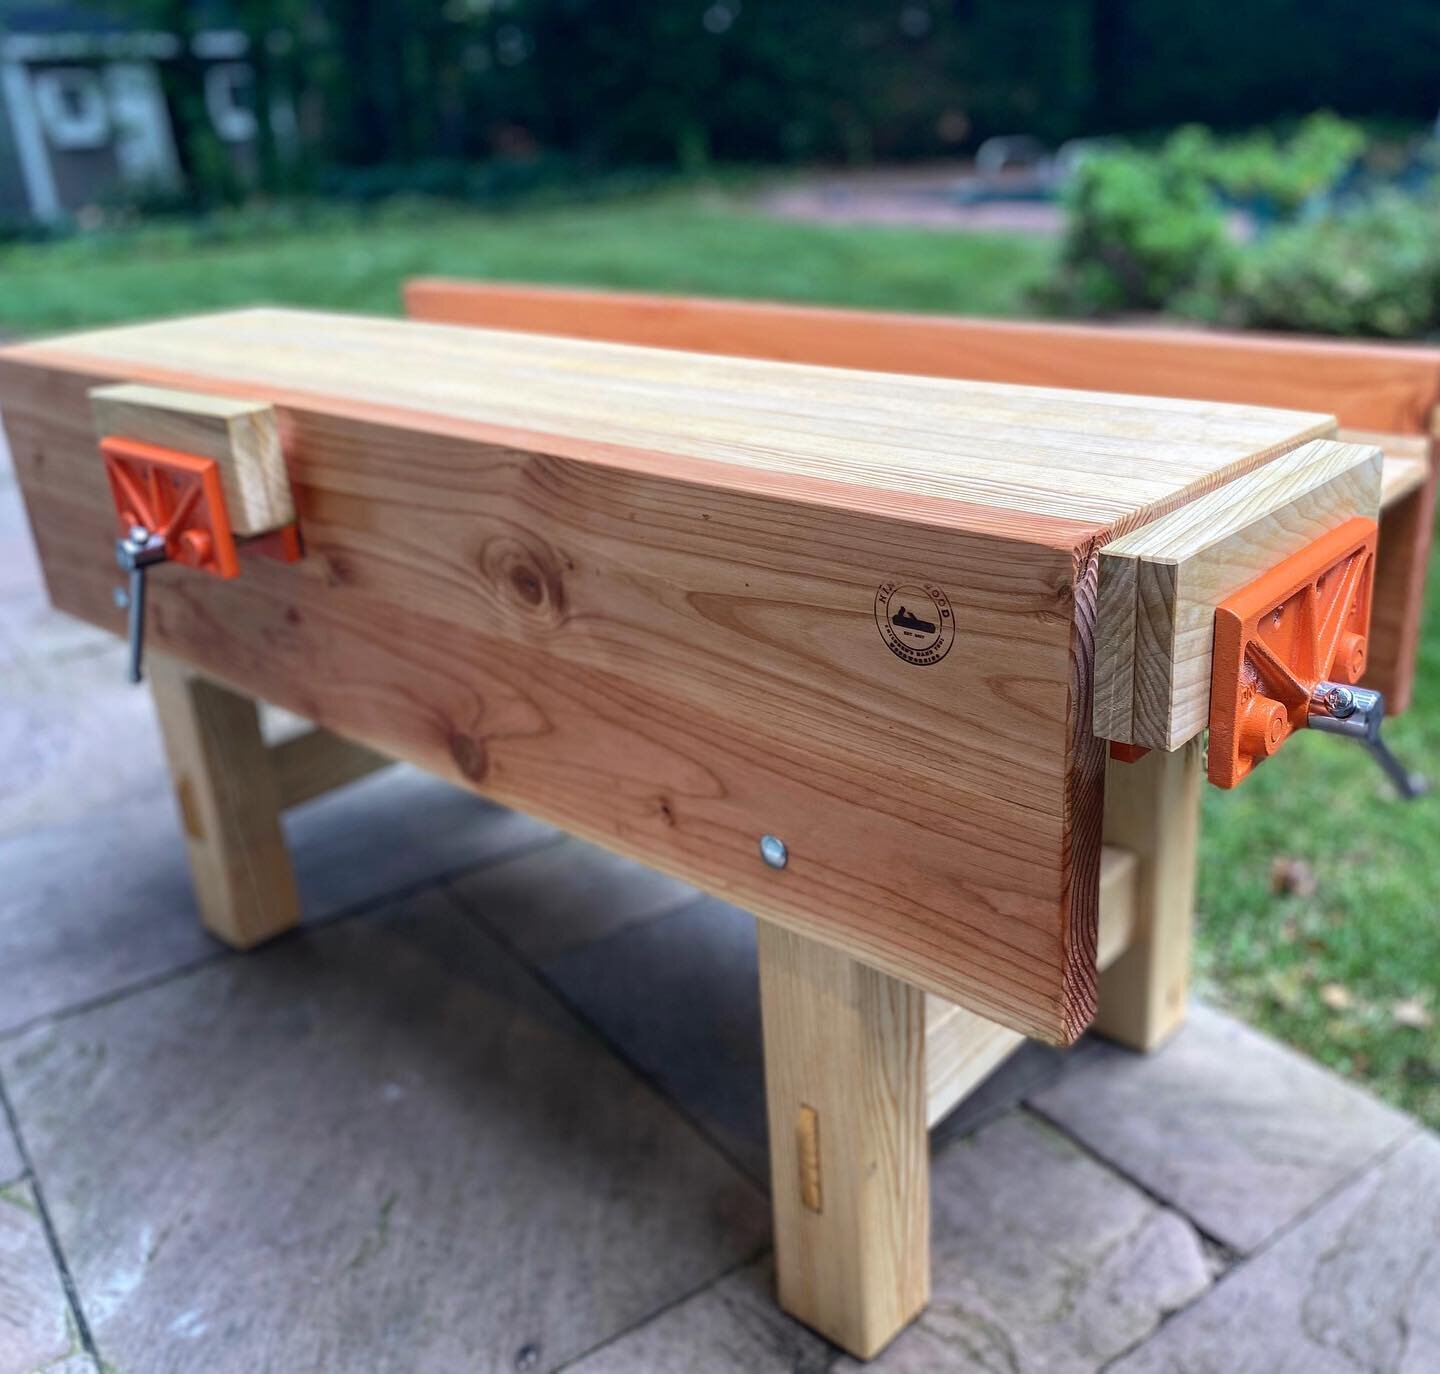 It was a pleasure to build and deliver this children&rsquo;s workbench to @cityandcountry school today. I hope it gets a lot of use!

#woodworking #kidswoodworking #nyckids #workbench #montessori #waldorf #nykids #handtools